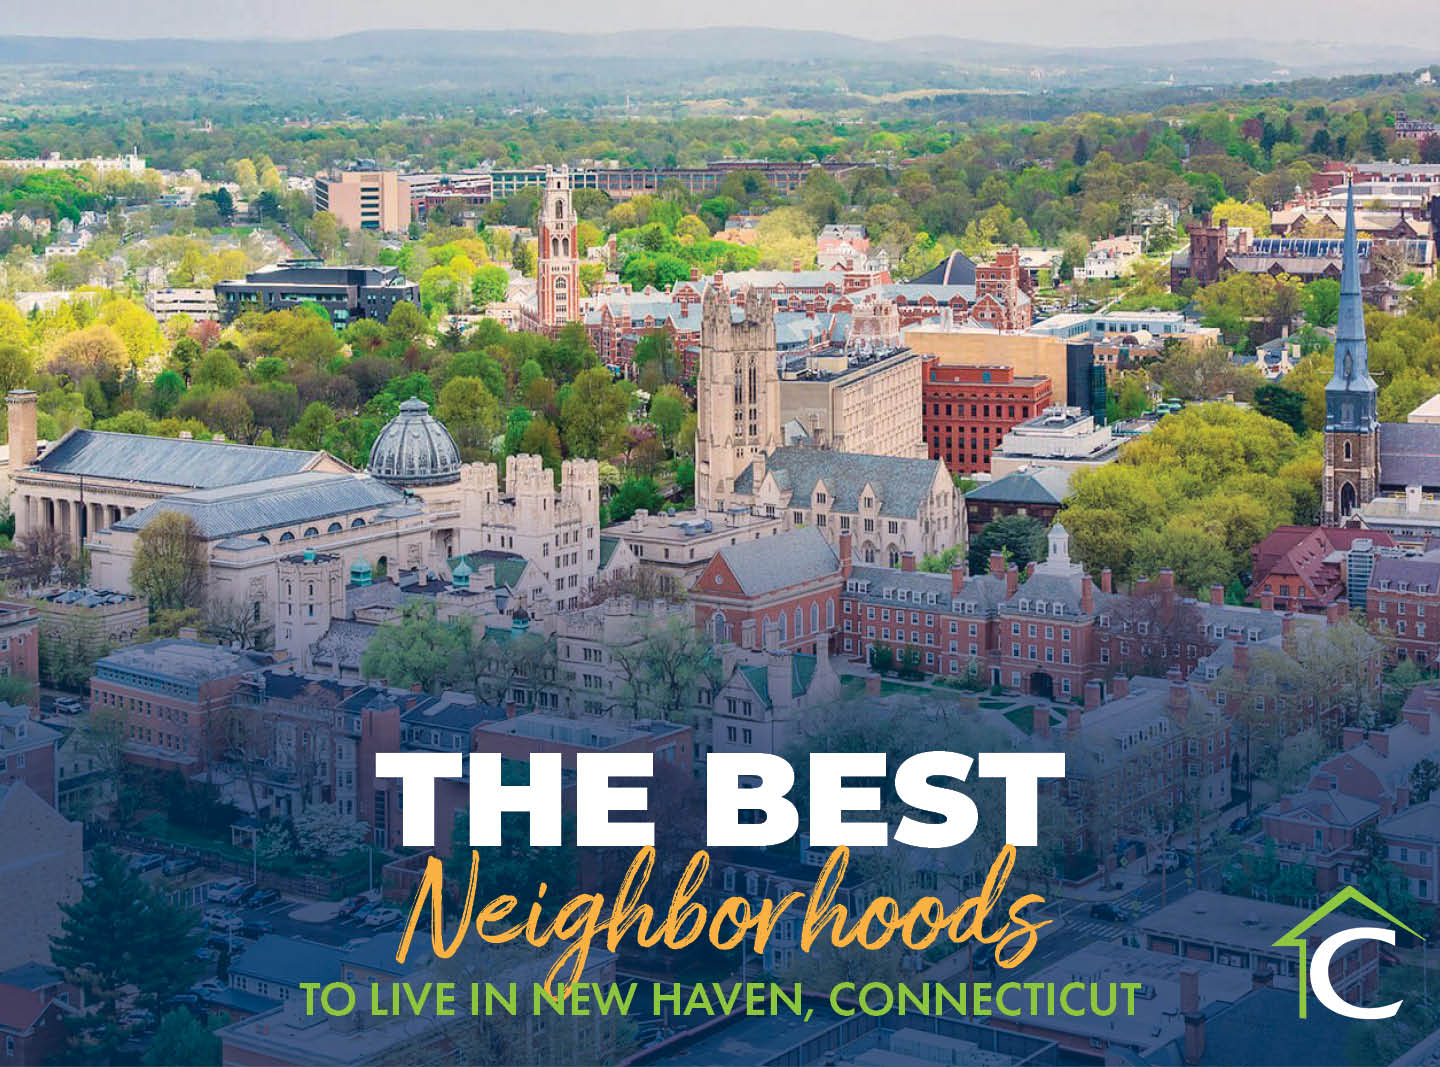 The Best Neighborhoods To Live In New Haven, Connecticut text with aerial view of new haven in background